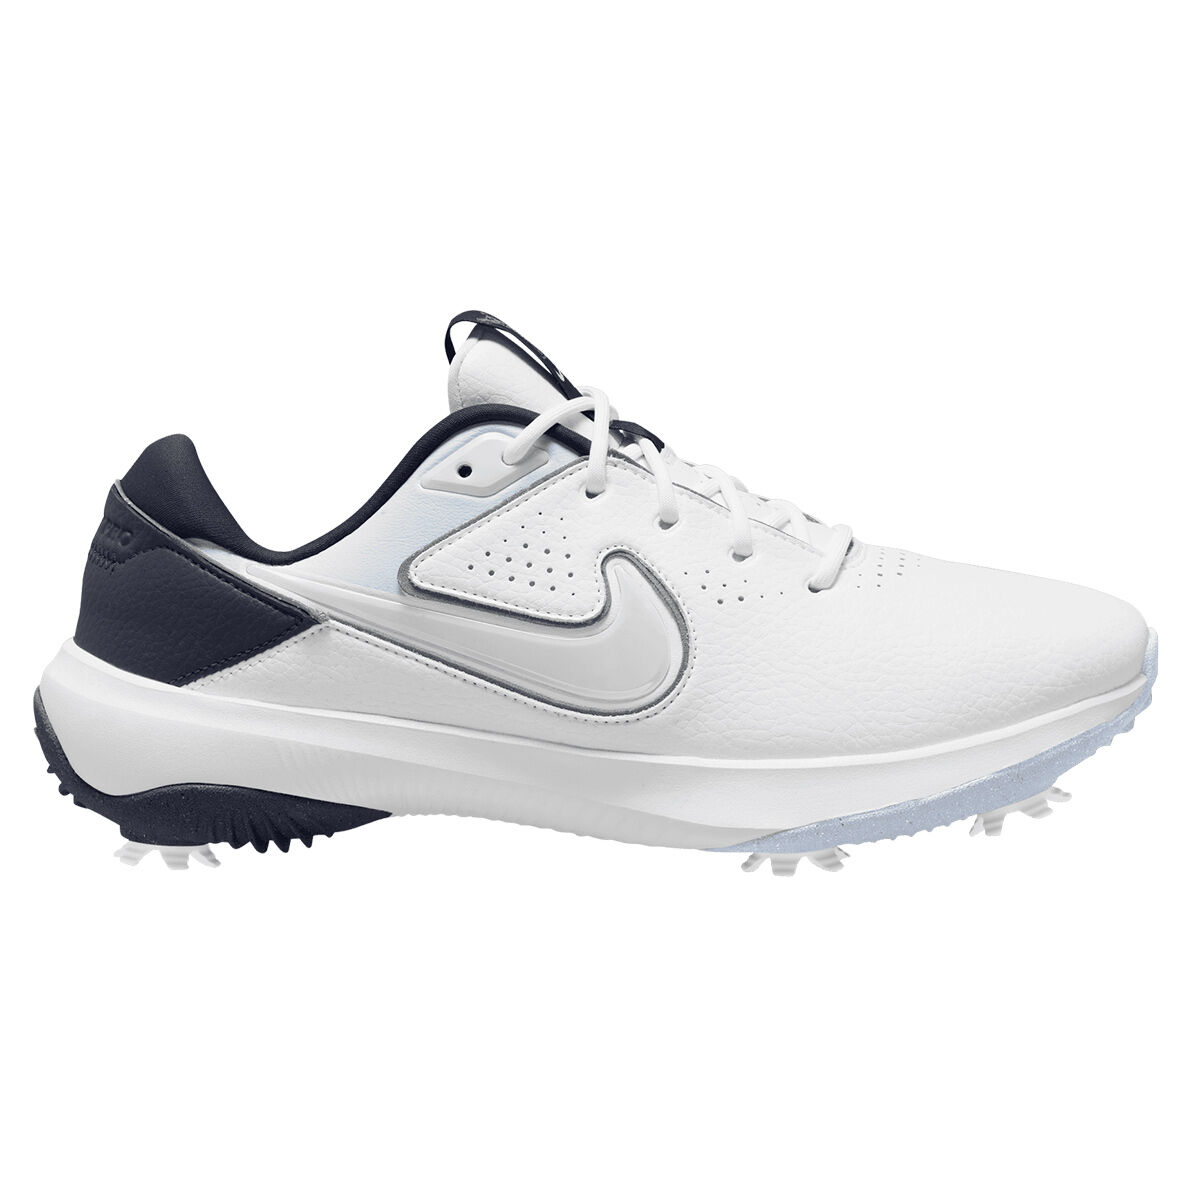 Nike Men’s Victory Pro 3 Waterproof Spiked Golf Shoes, Mens, White/football grey/obsidian, 10 | American Golf